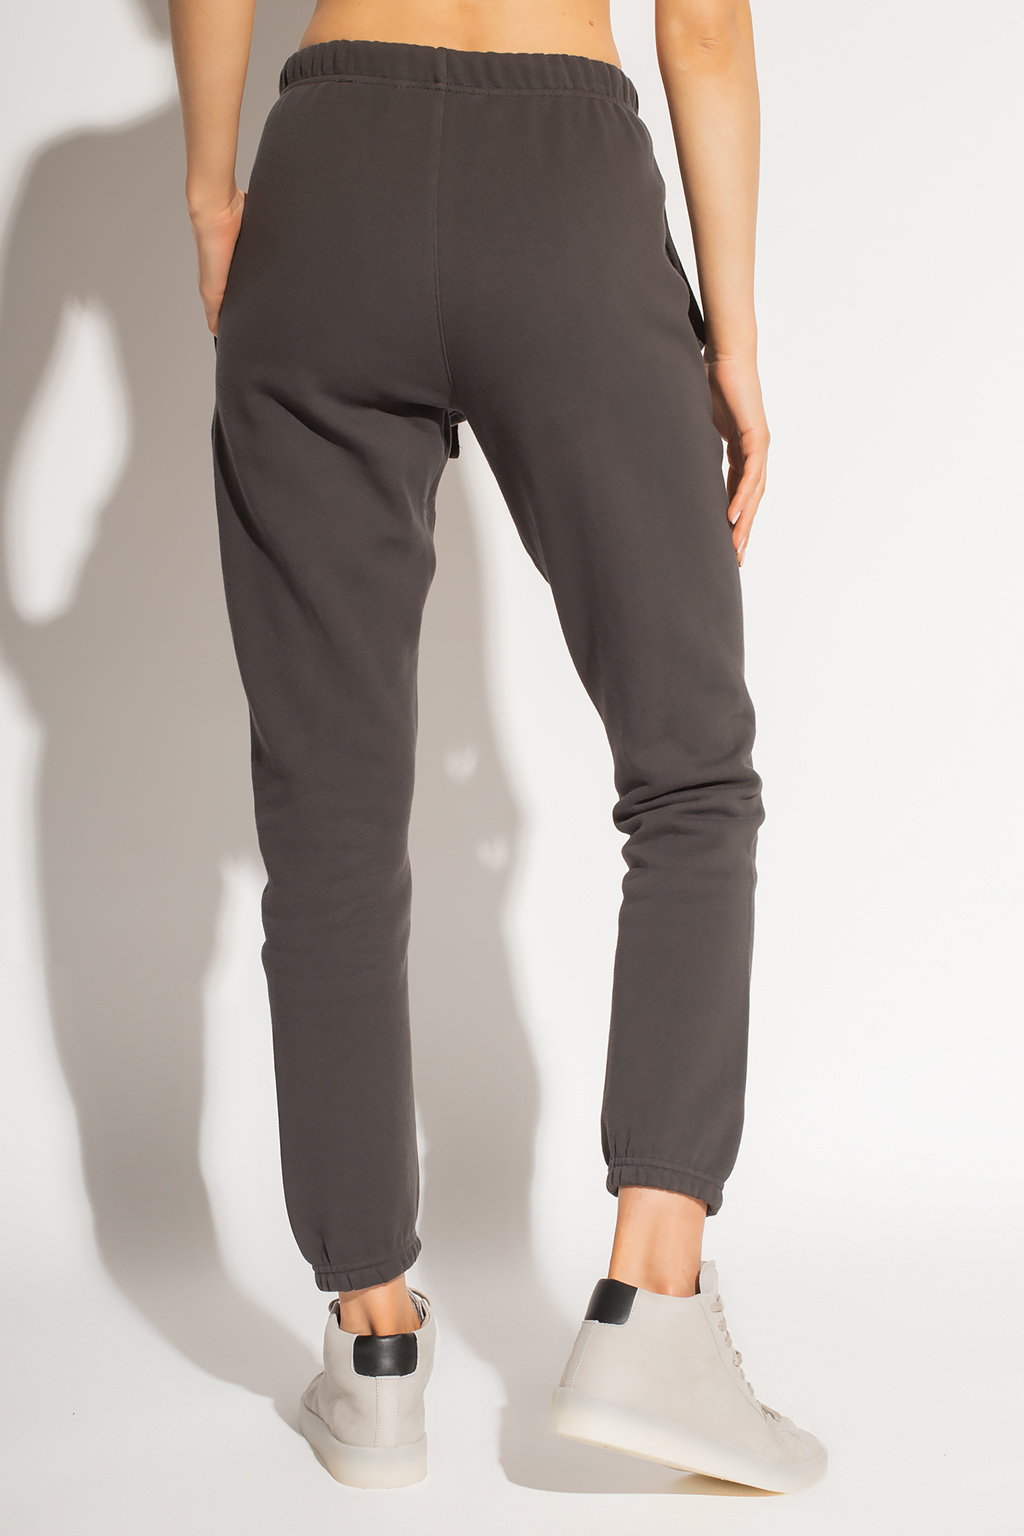 Fear Of God Essentials Sweatpants with logo | Women's Clothing 